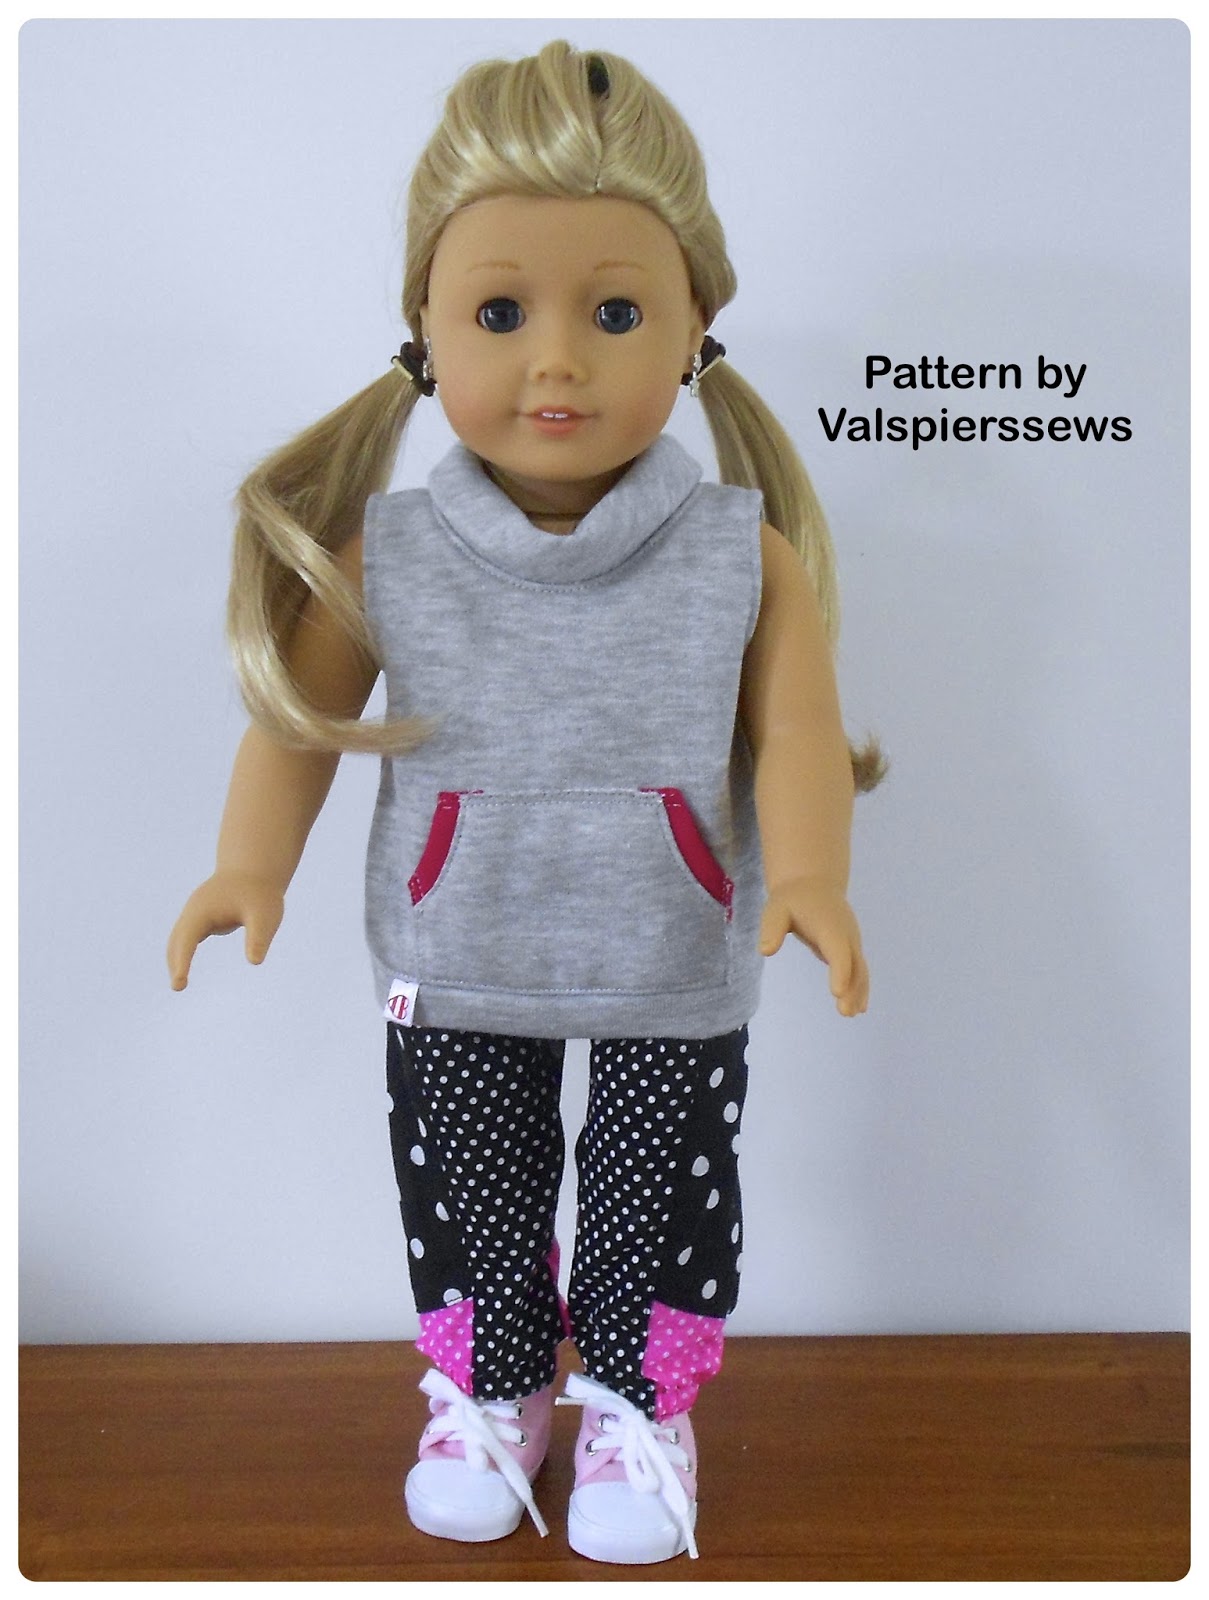 Doll Clothes Patterns by Valspierssews: Creating Doll Clothes with ...